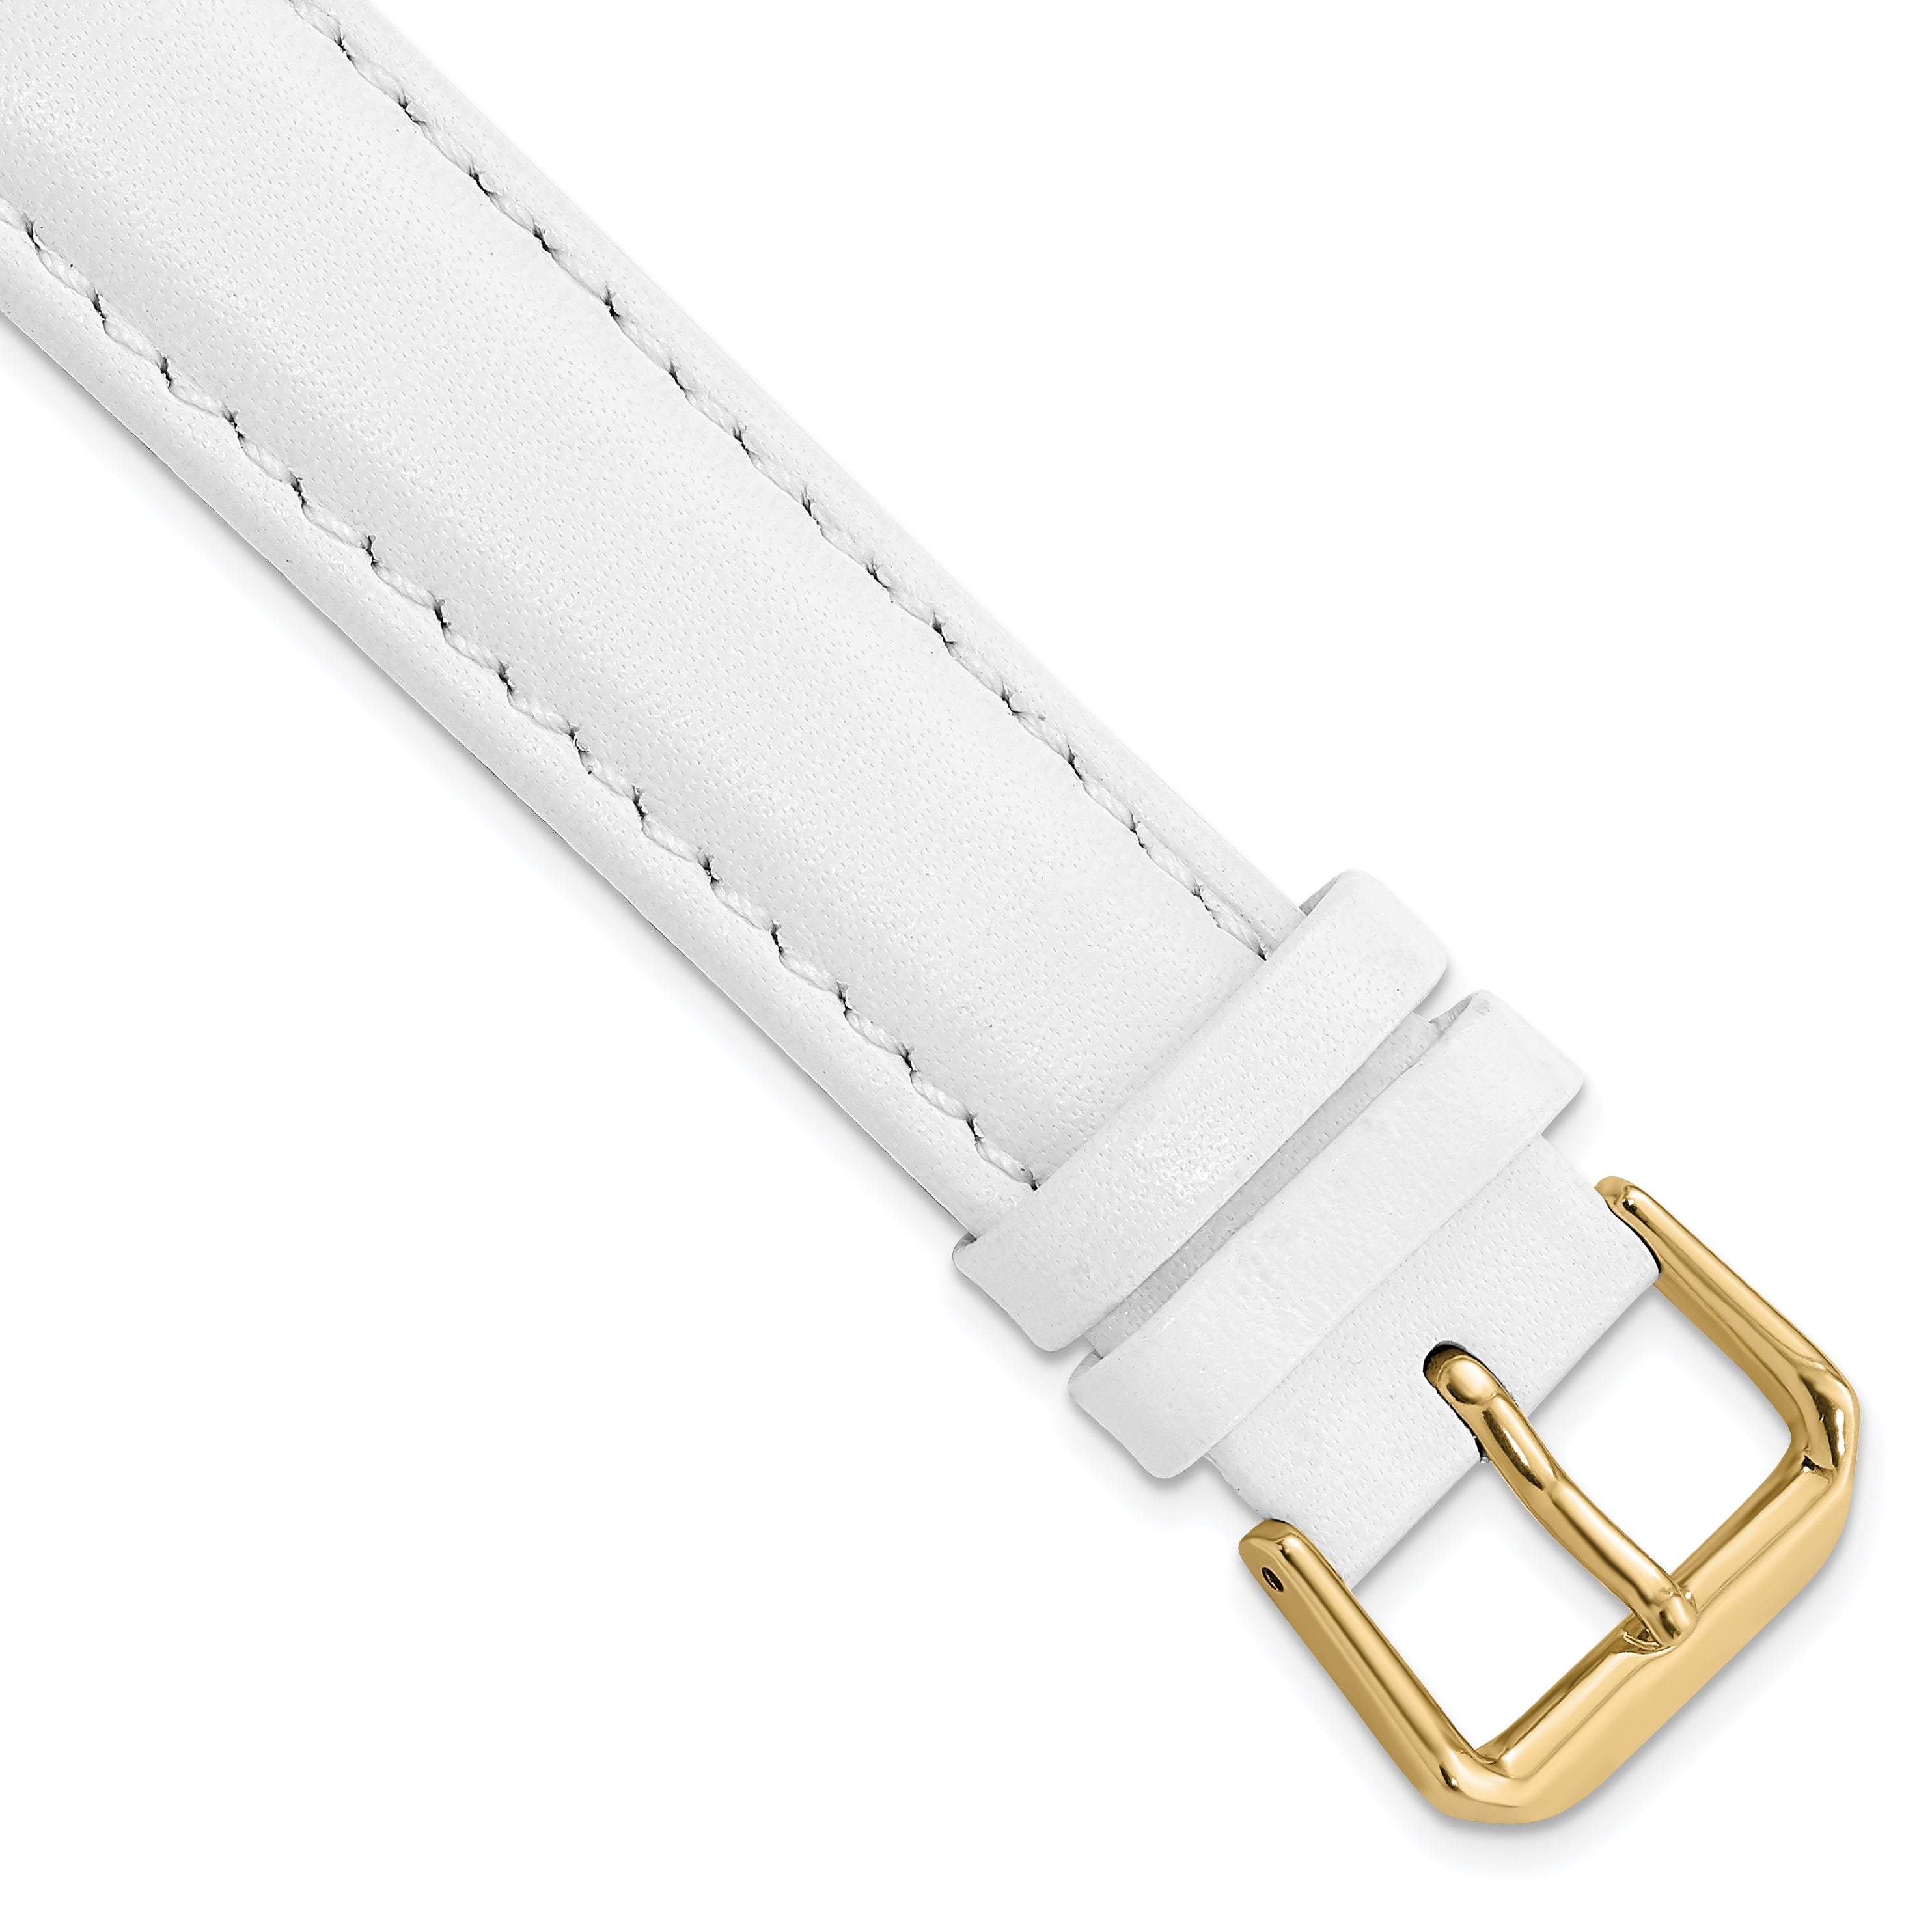 DeBeer 17mm White Smooth Leather with Gold-tone Buckle 7.5 inch Watch Band